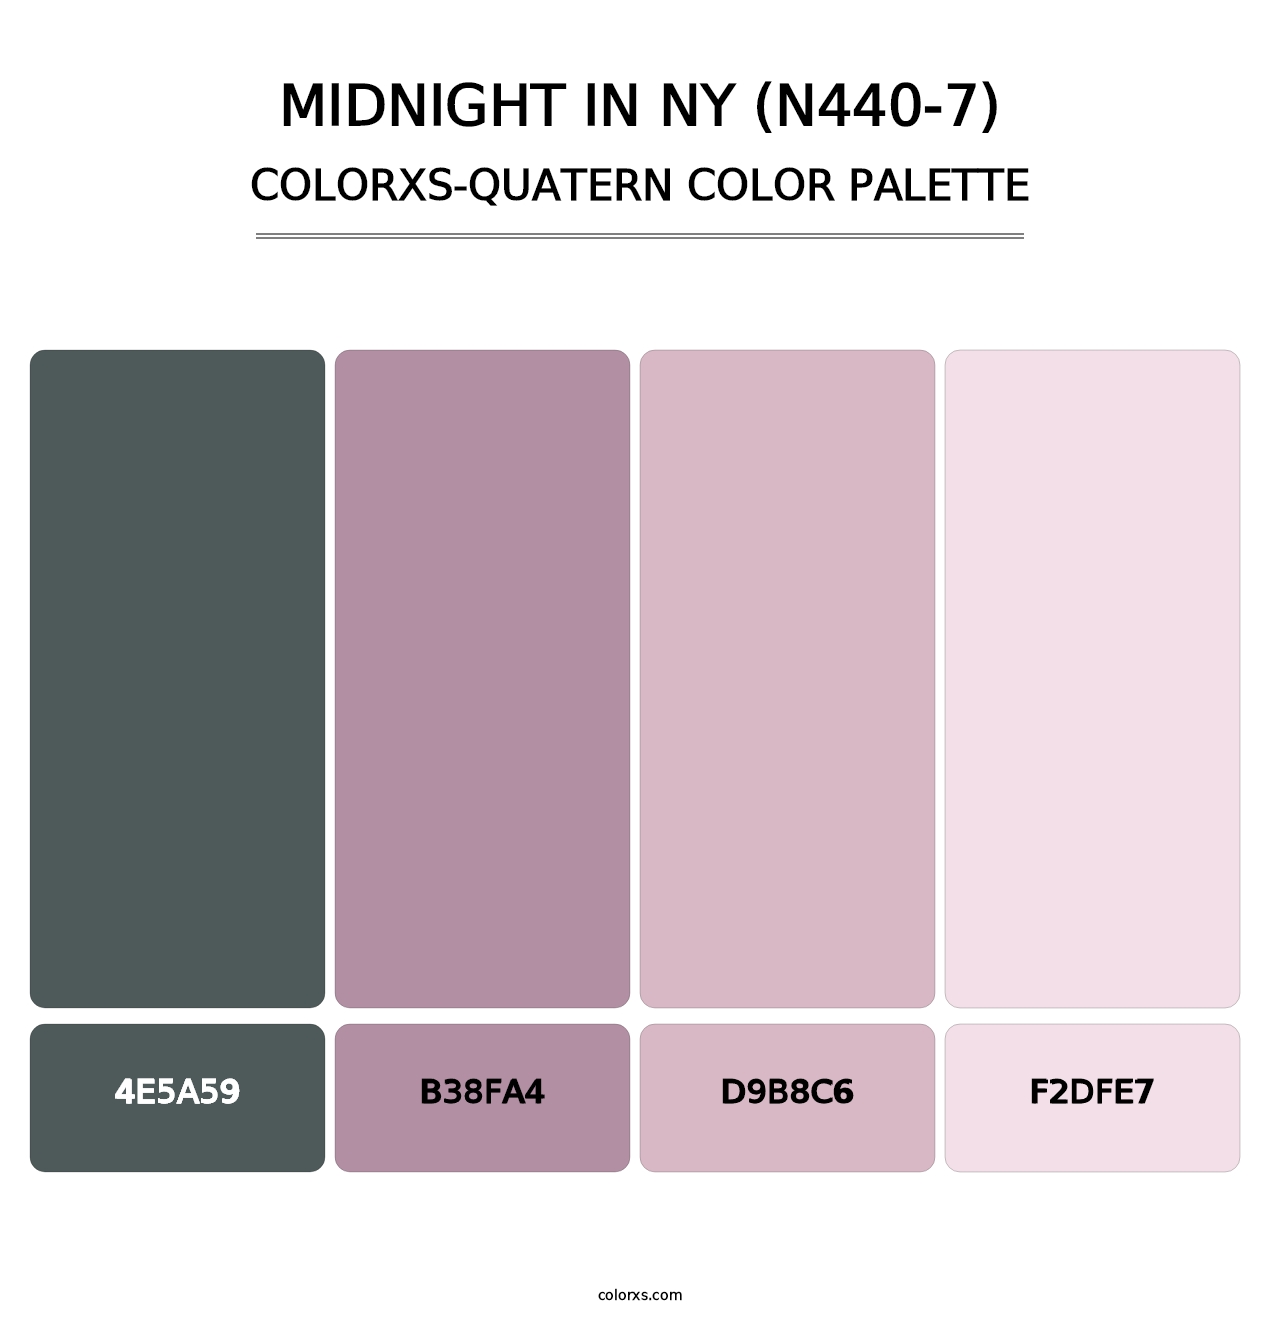 Midnight In Ny (N440-7) - Colorxs Quatern Palette